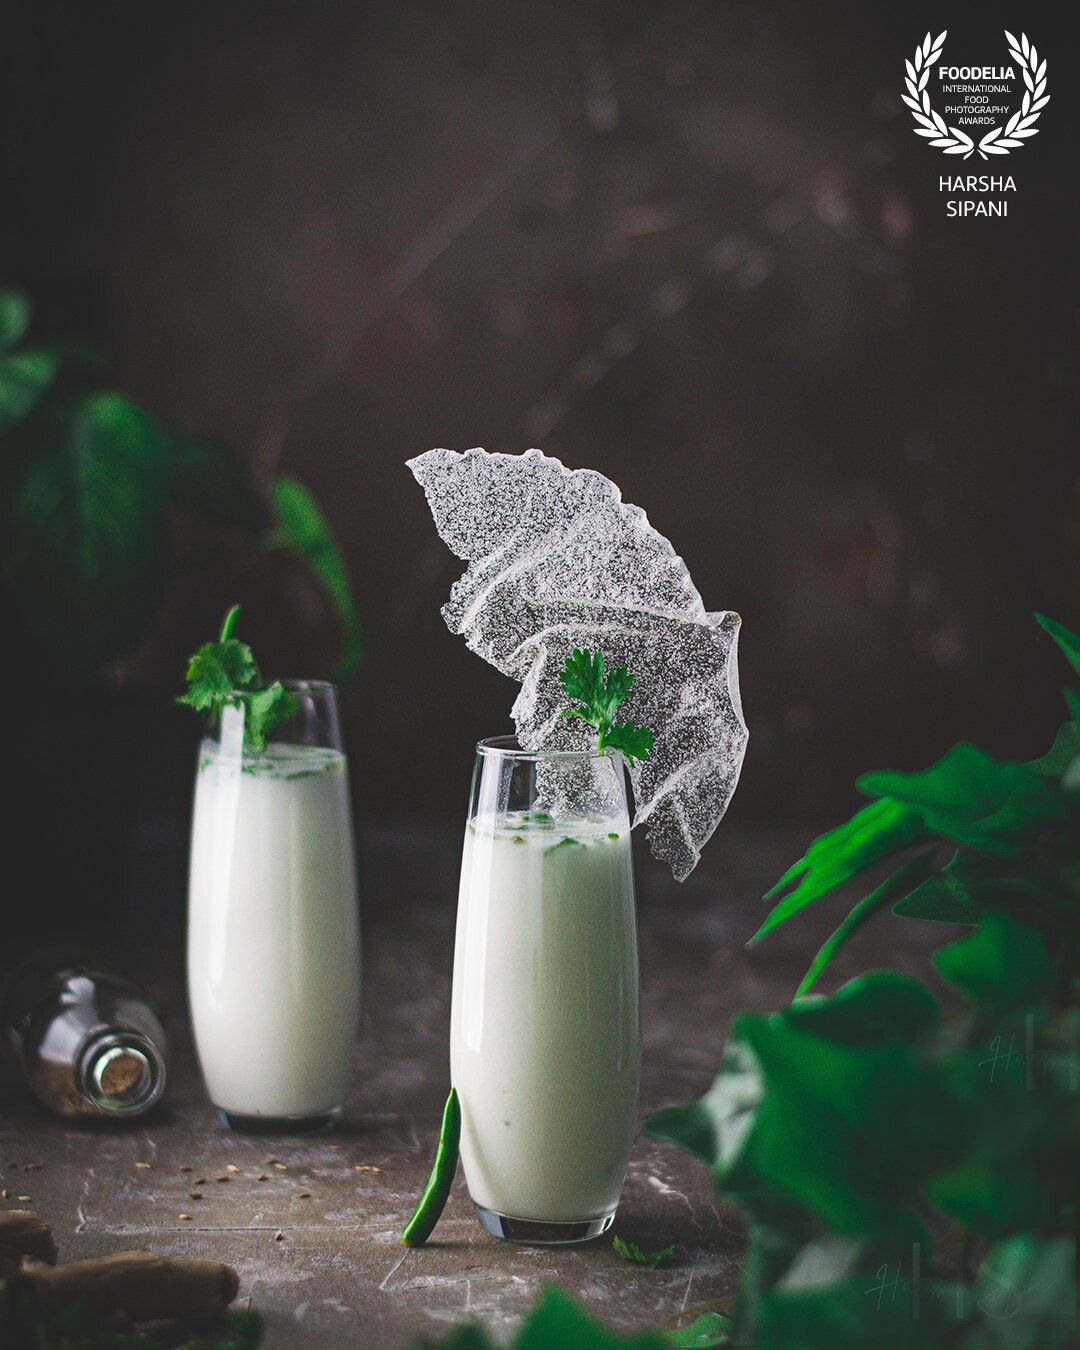 Who loves chaas aka buttermilk? Are you a sweet lassi or spicy chaas fan? My absolute favorite is spicy masala chaas ???<br />
Recipe:<br />
<br />
1 small green chili<br />
1/2 inch Ginger<br />
Handful full of coriander leaves<br />
1/2 cup Yoghurt<br />
1 tbsp Lemon juice<br />
1/2 tsp pink salt<br />
1/4 tsp regular salt<br />
3/4 tsp roasted Cumin seeds<br />
1 1/2 cups Water<br />
½ teaspoon chaat masala <br />
Blend everything together in a blender and serve in a tall glass chilled. Garnish with coriander and chaat masala.